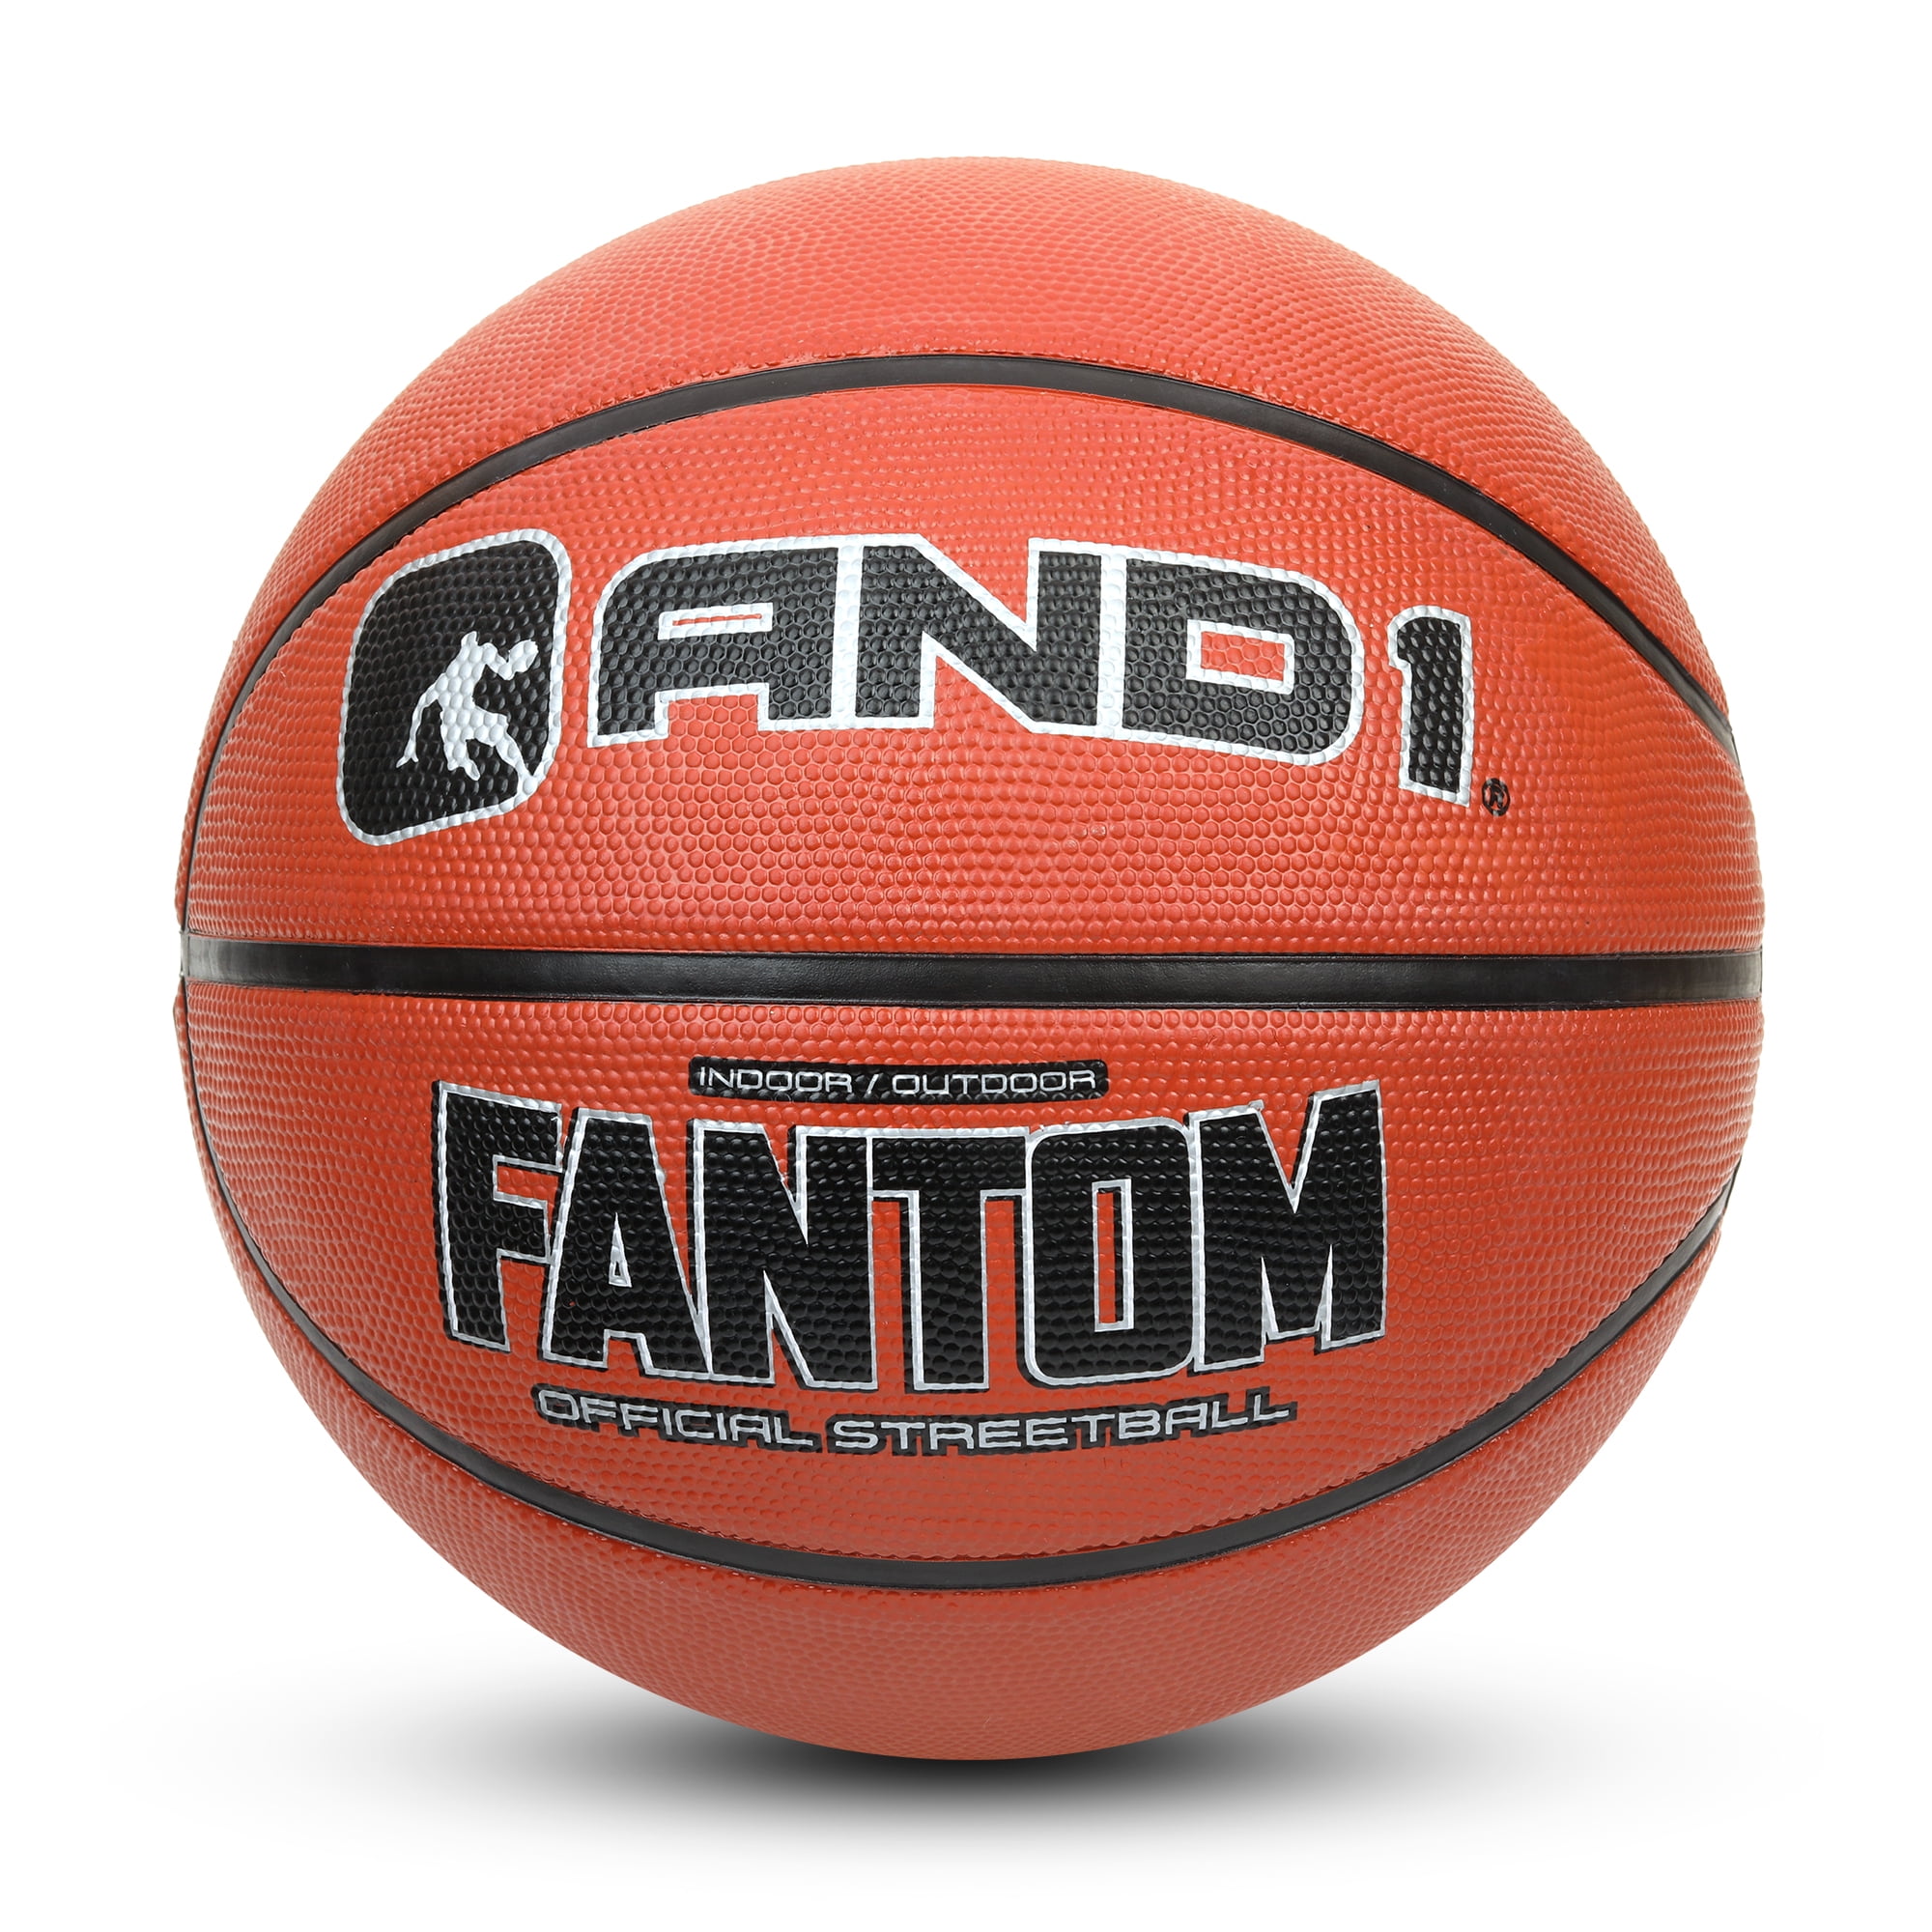 AND1 Fantom Rubber Basketball & Pump Made for Indoor and Outdoor Basketball Games Official Size Streetball 